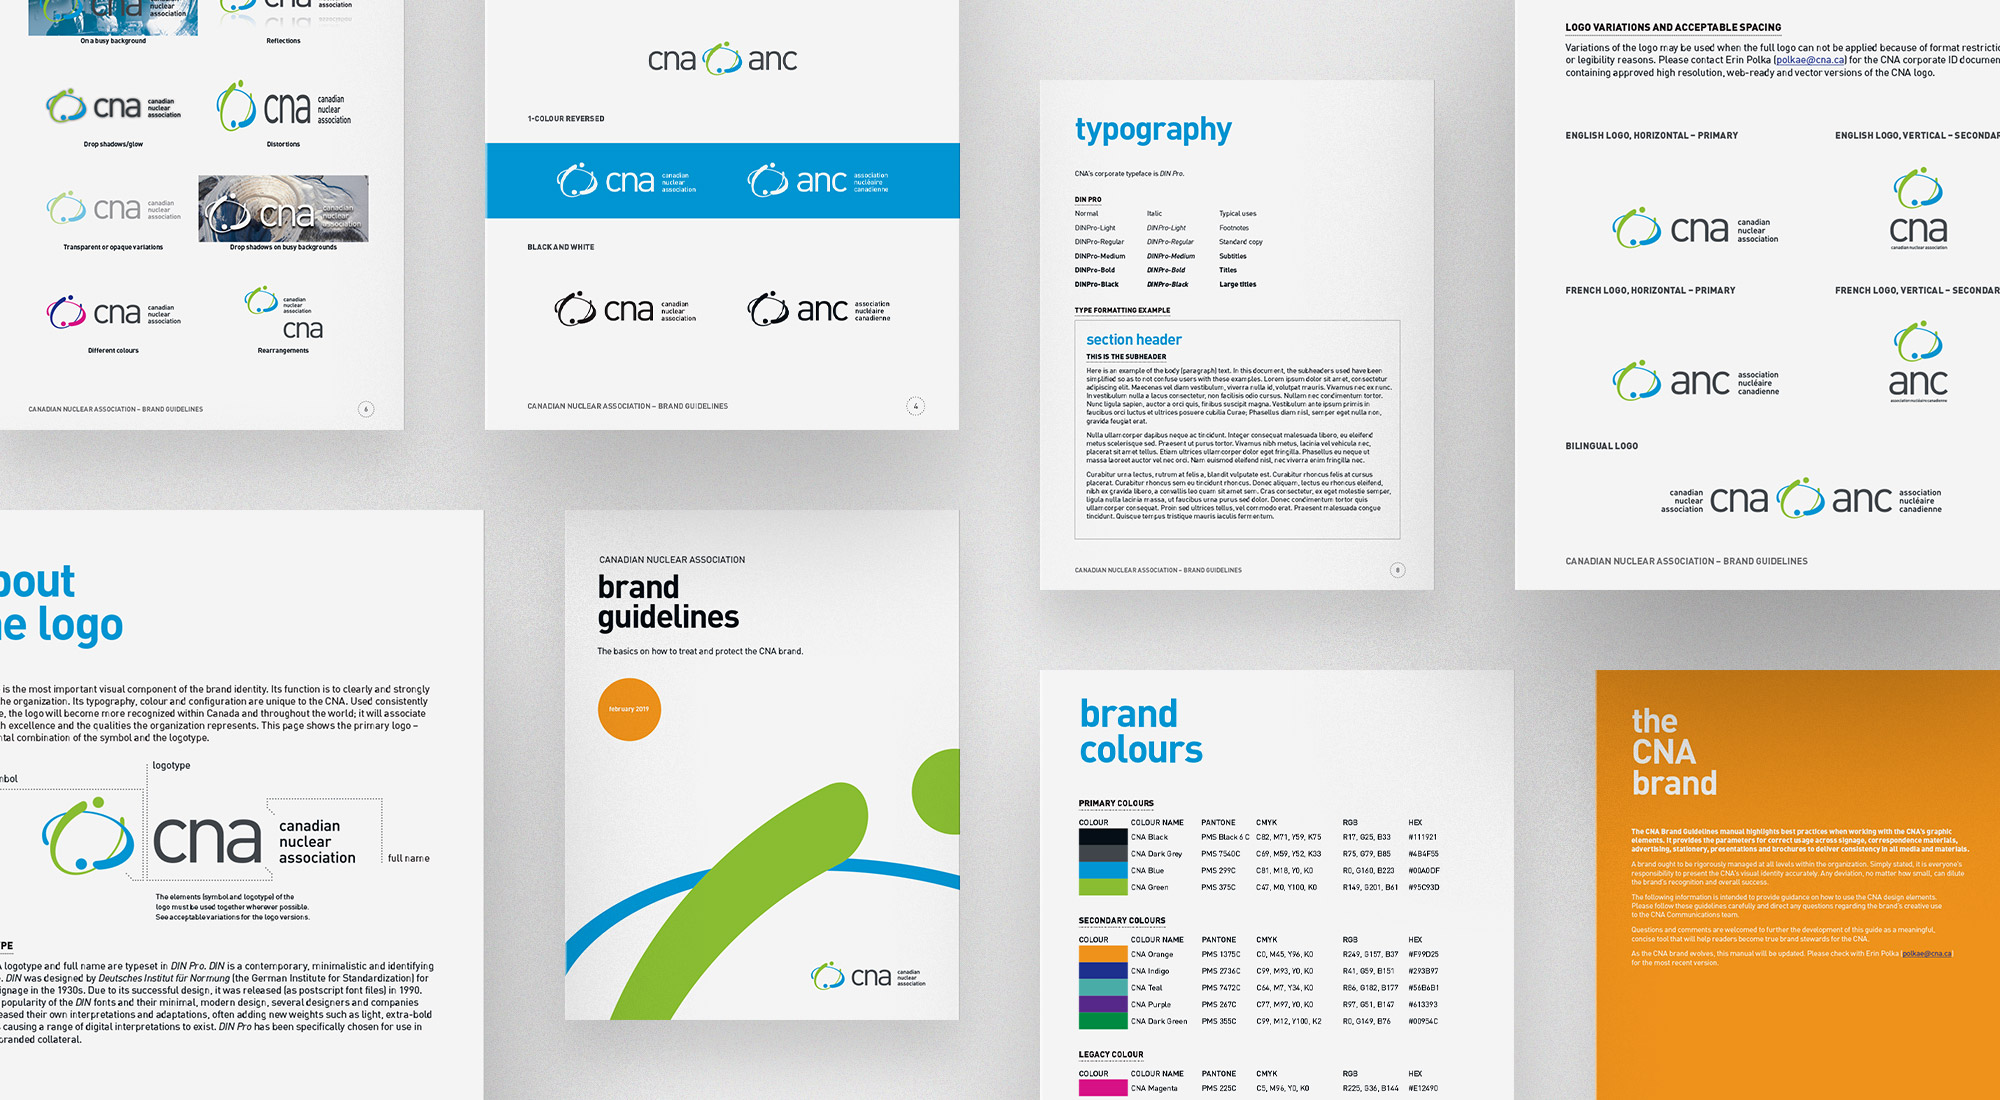 Canadian Nuclear Association Brand Guidelines